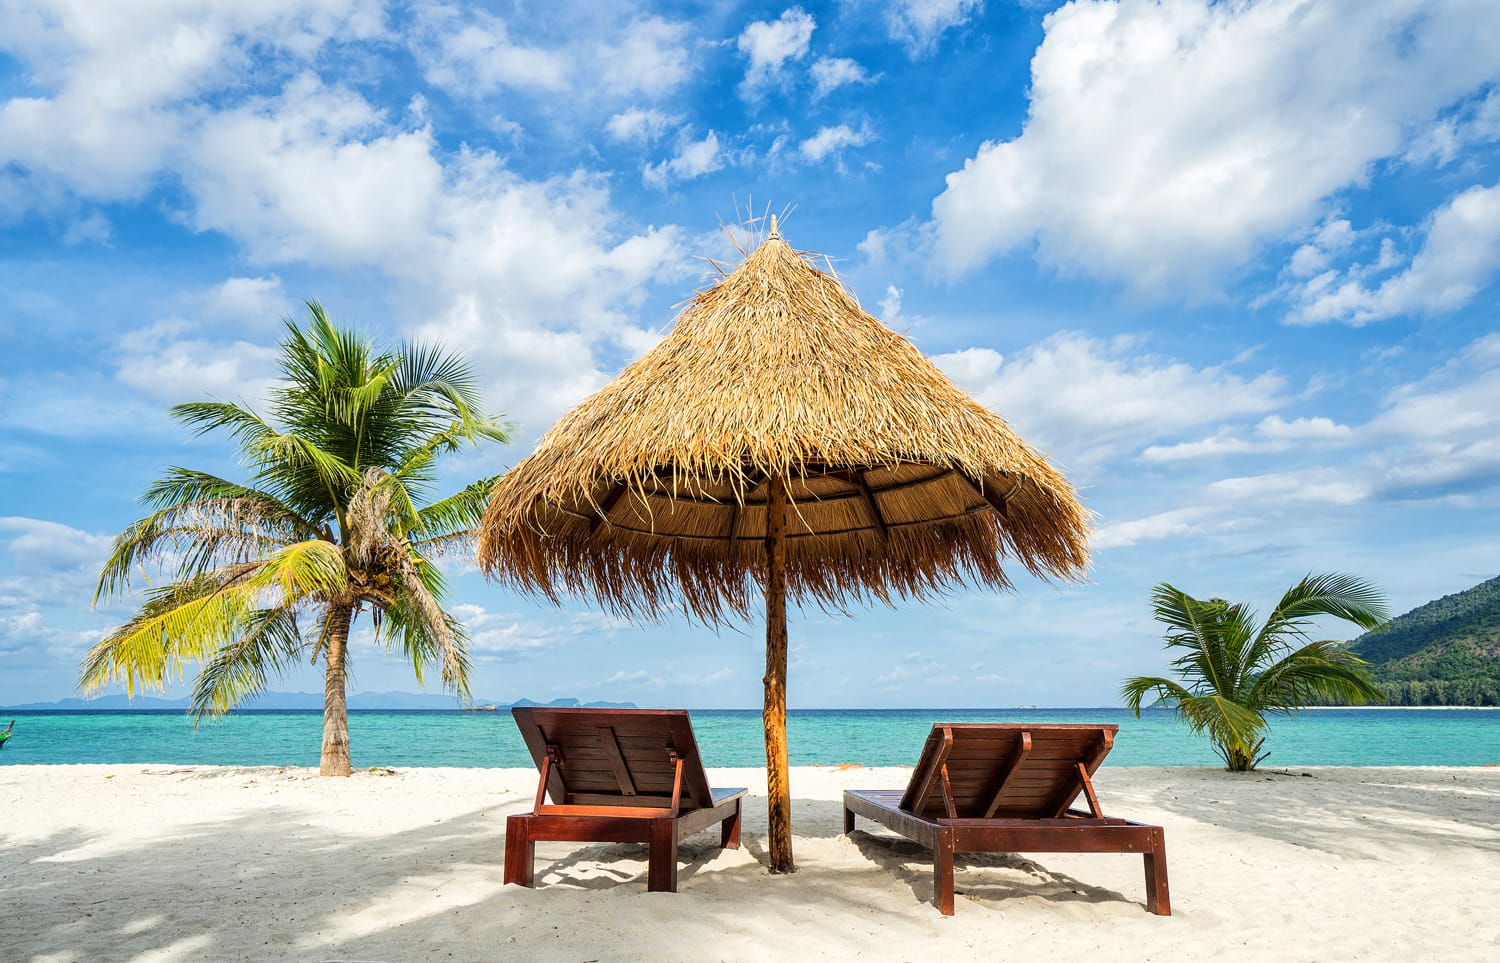 Vacation in tropical countries. Beach chairs, umbrella and palms on the beach in the Bahamas